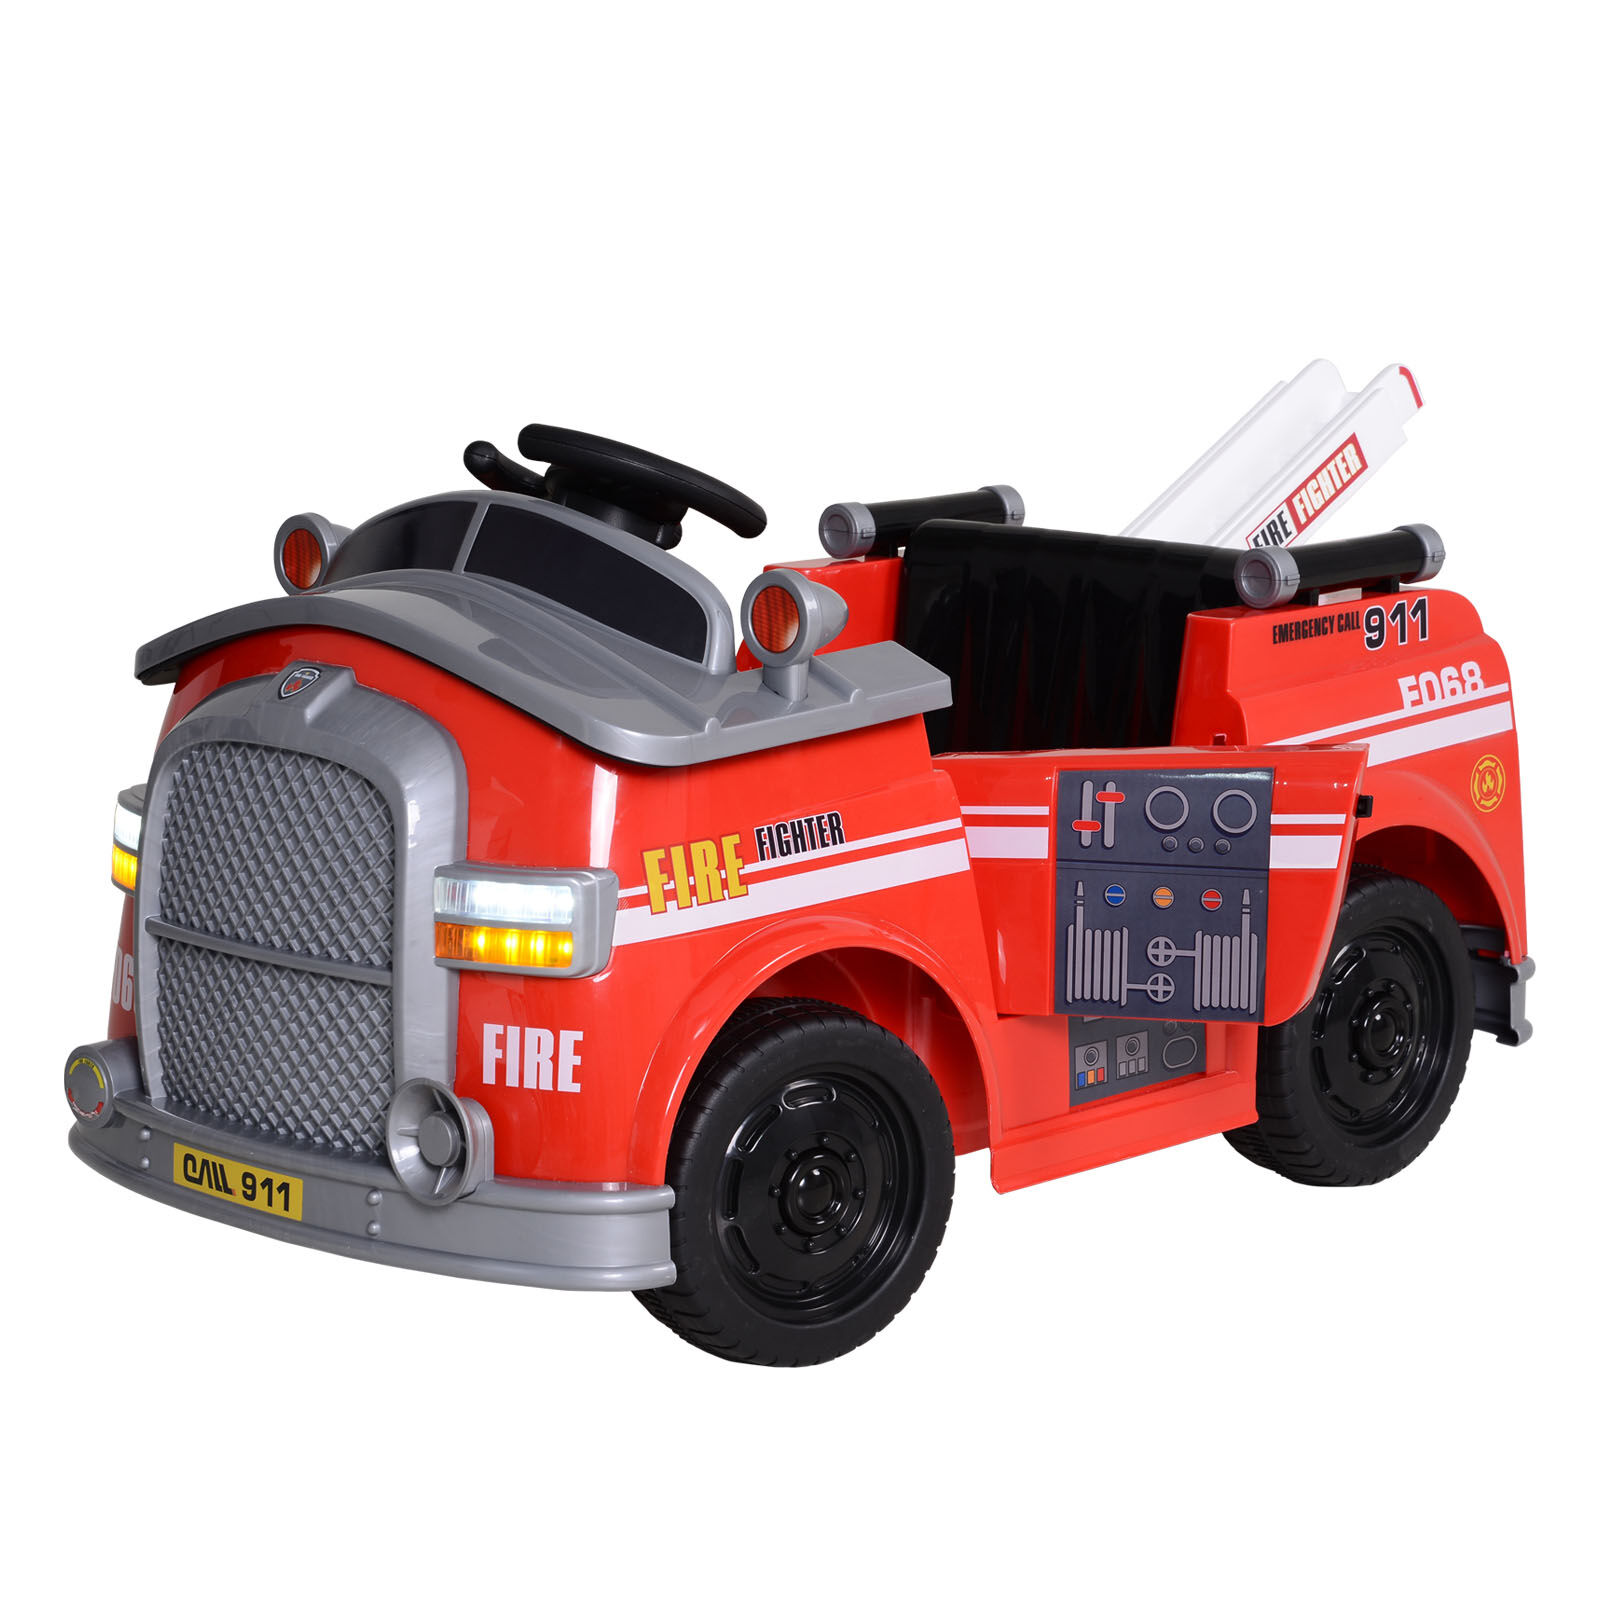 Aosom 6V Electric Ride-On Fire Truck Vehicle for Kids with Remote Control, Music, Lights & Ladder, Red